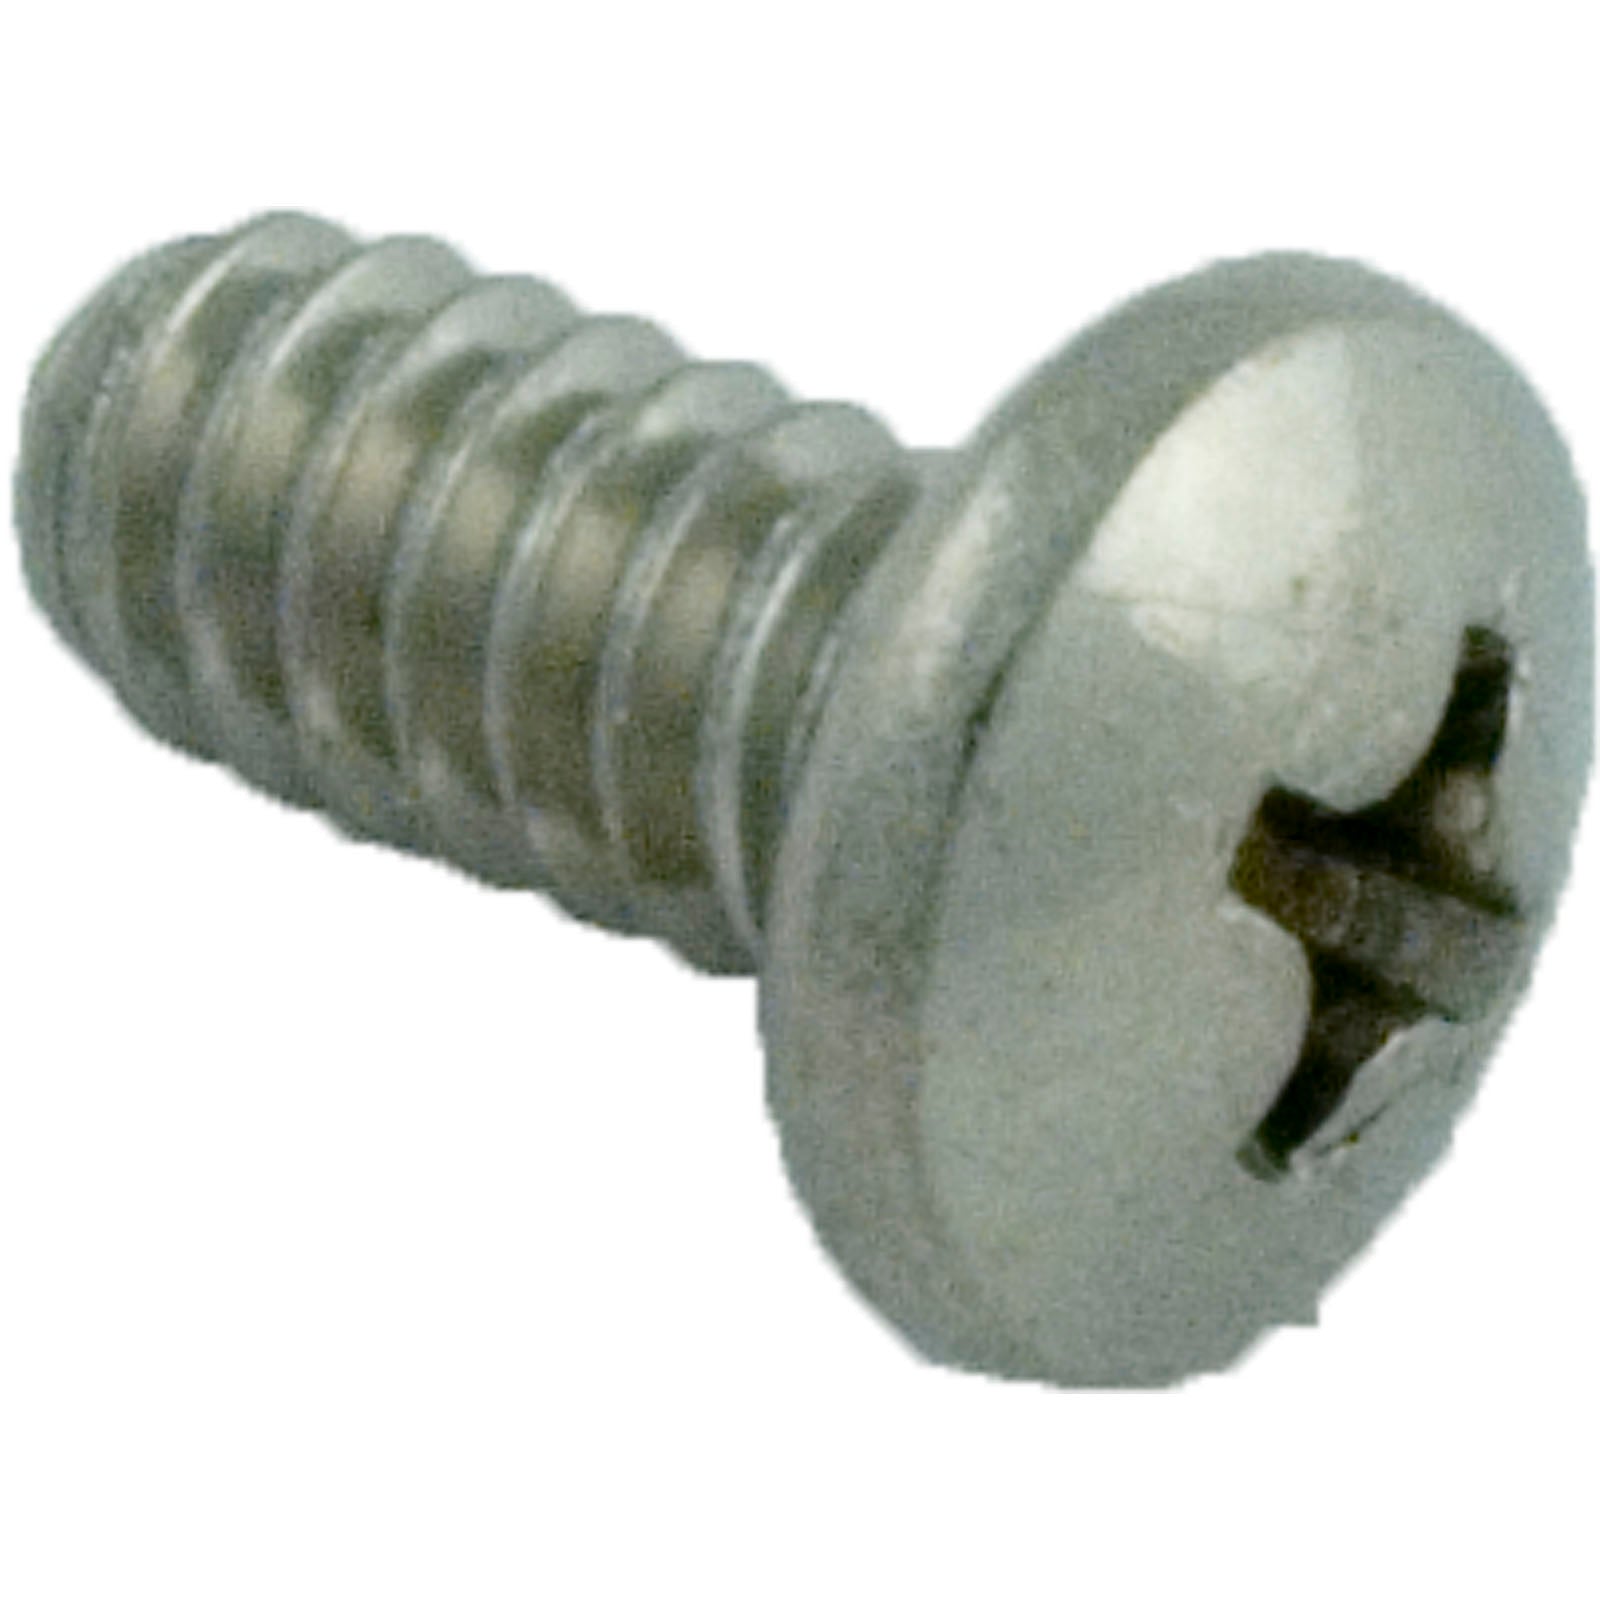 Light Screw, Pent , American Products, Spabrite, 10-24 x 3/8 98208600